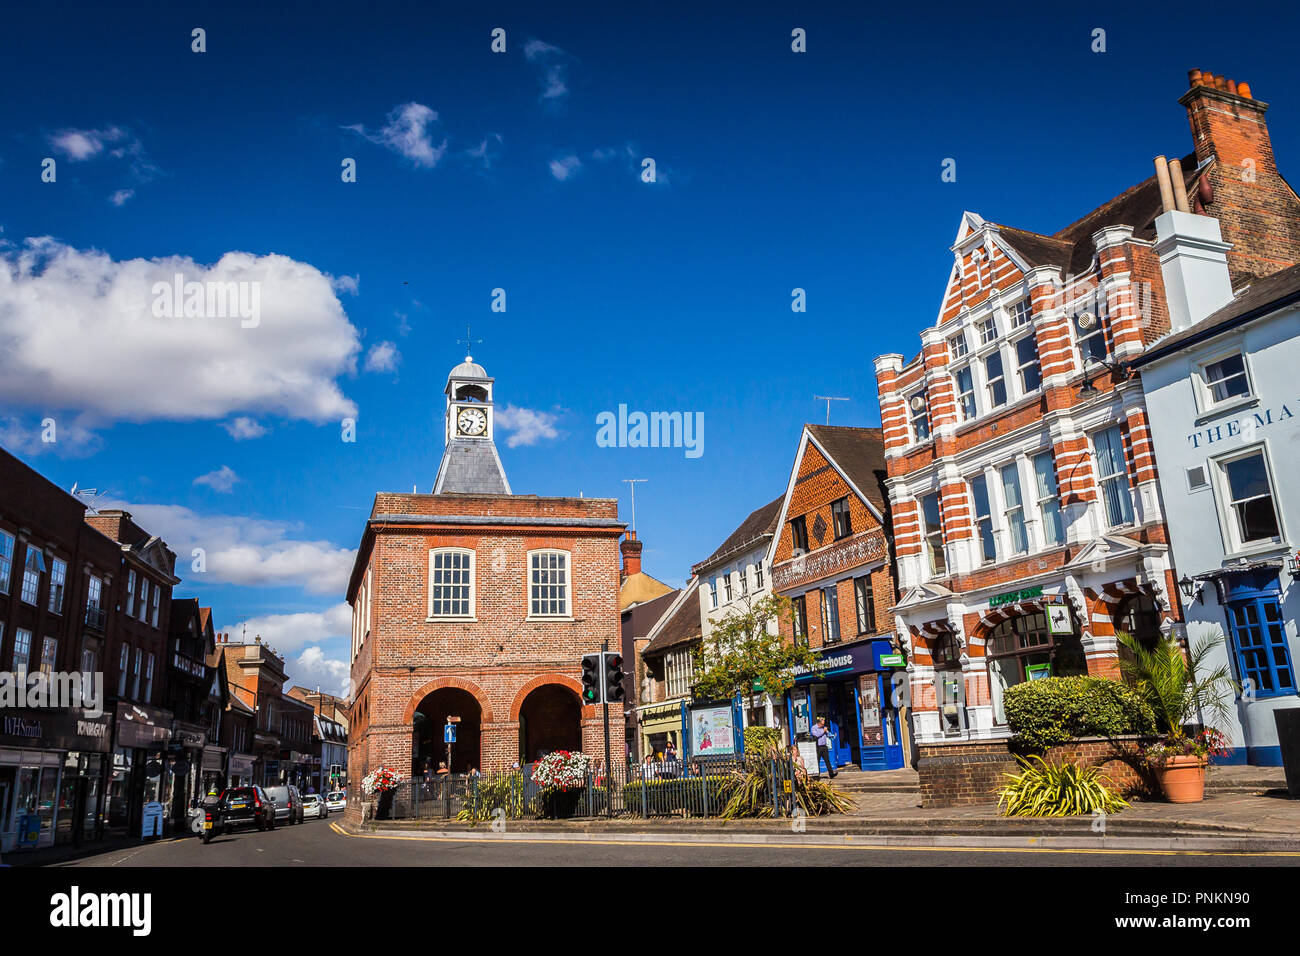 Reigate, UK - July 17th, 2018 - view of High street in historic market town of Reigate, Surrey, UK Stock Photo